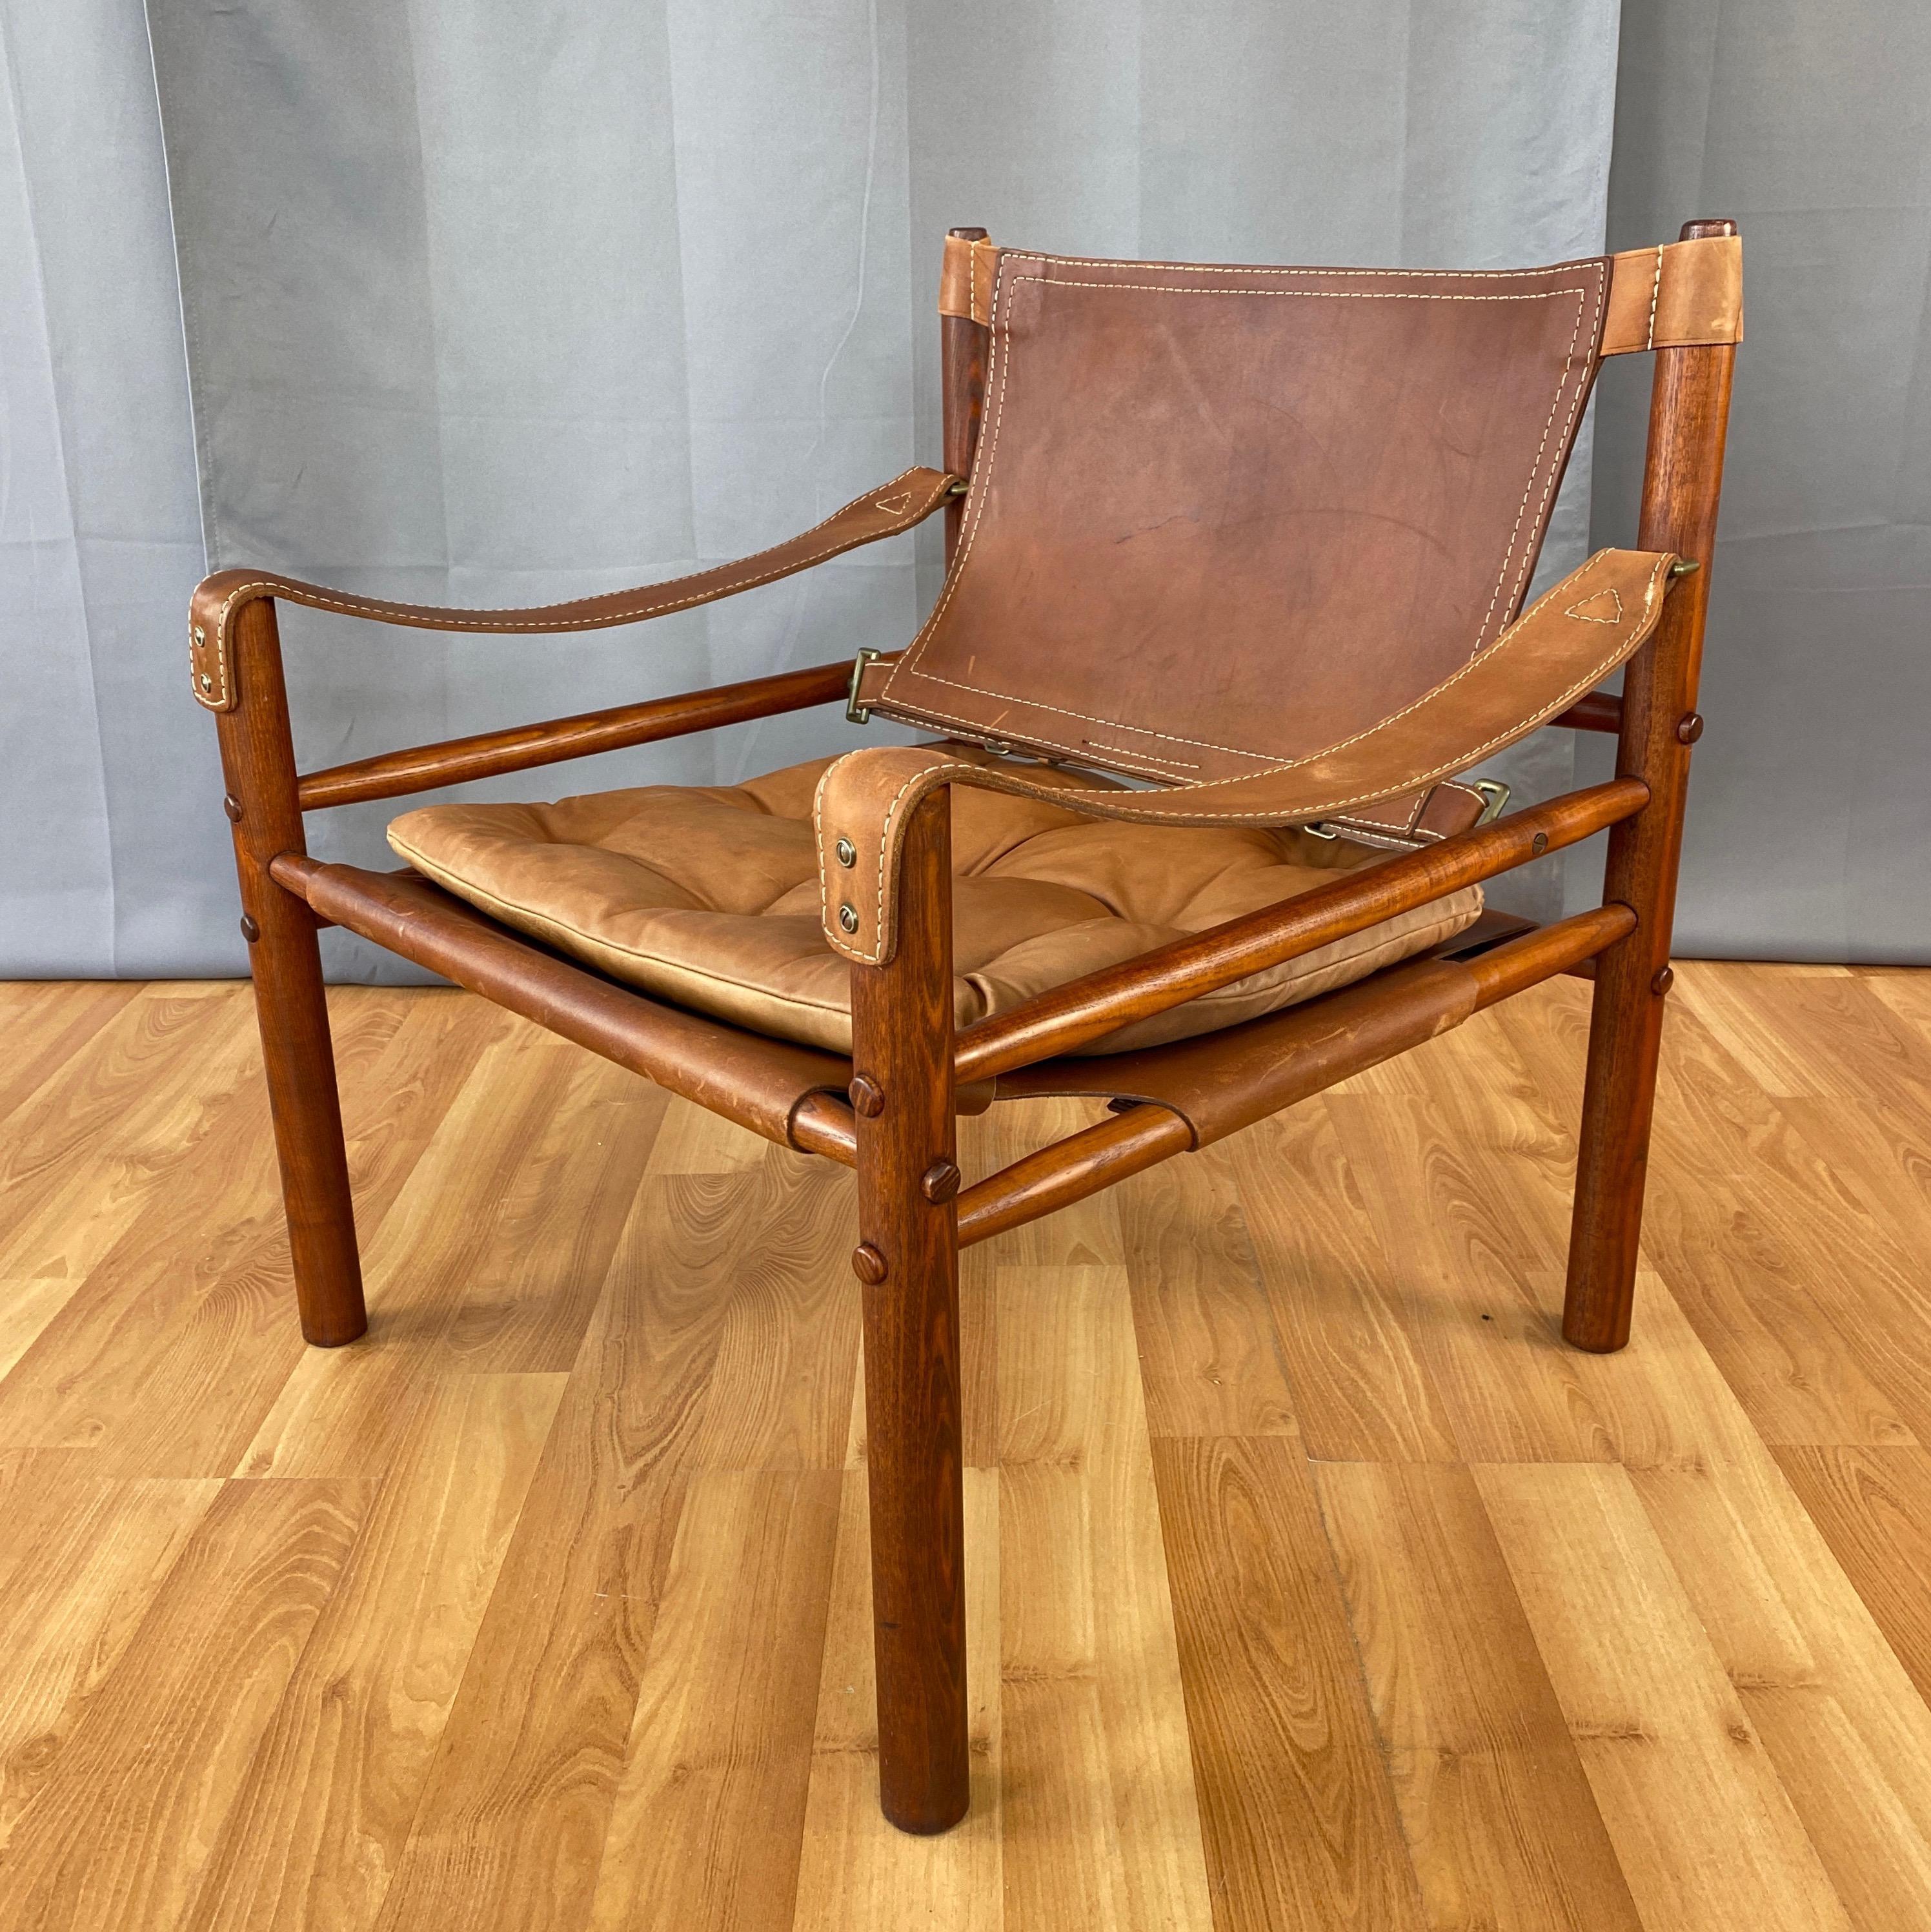 A very handsome 1970s Sirocco safari chair by Swedish designer Arne Norell in rosewood-colored oak and brown leather.

Solid oak frame with a tinted finish that gives it the appearance of vintage rosewood. Tapered dowel crosspiece elements fit